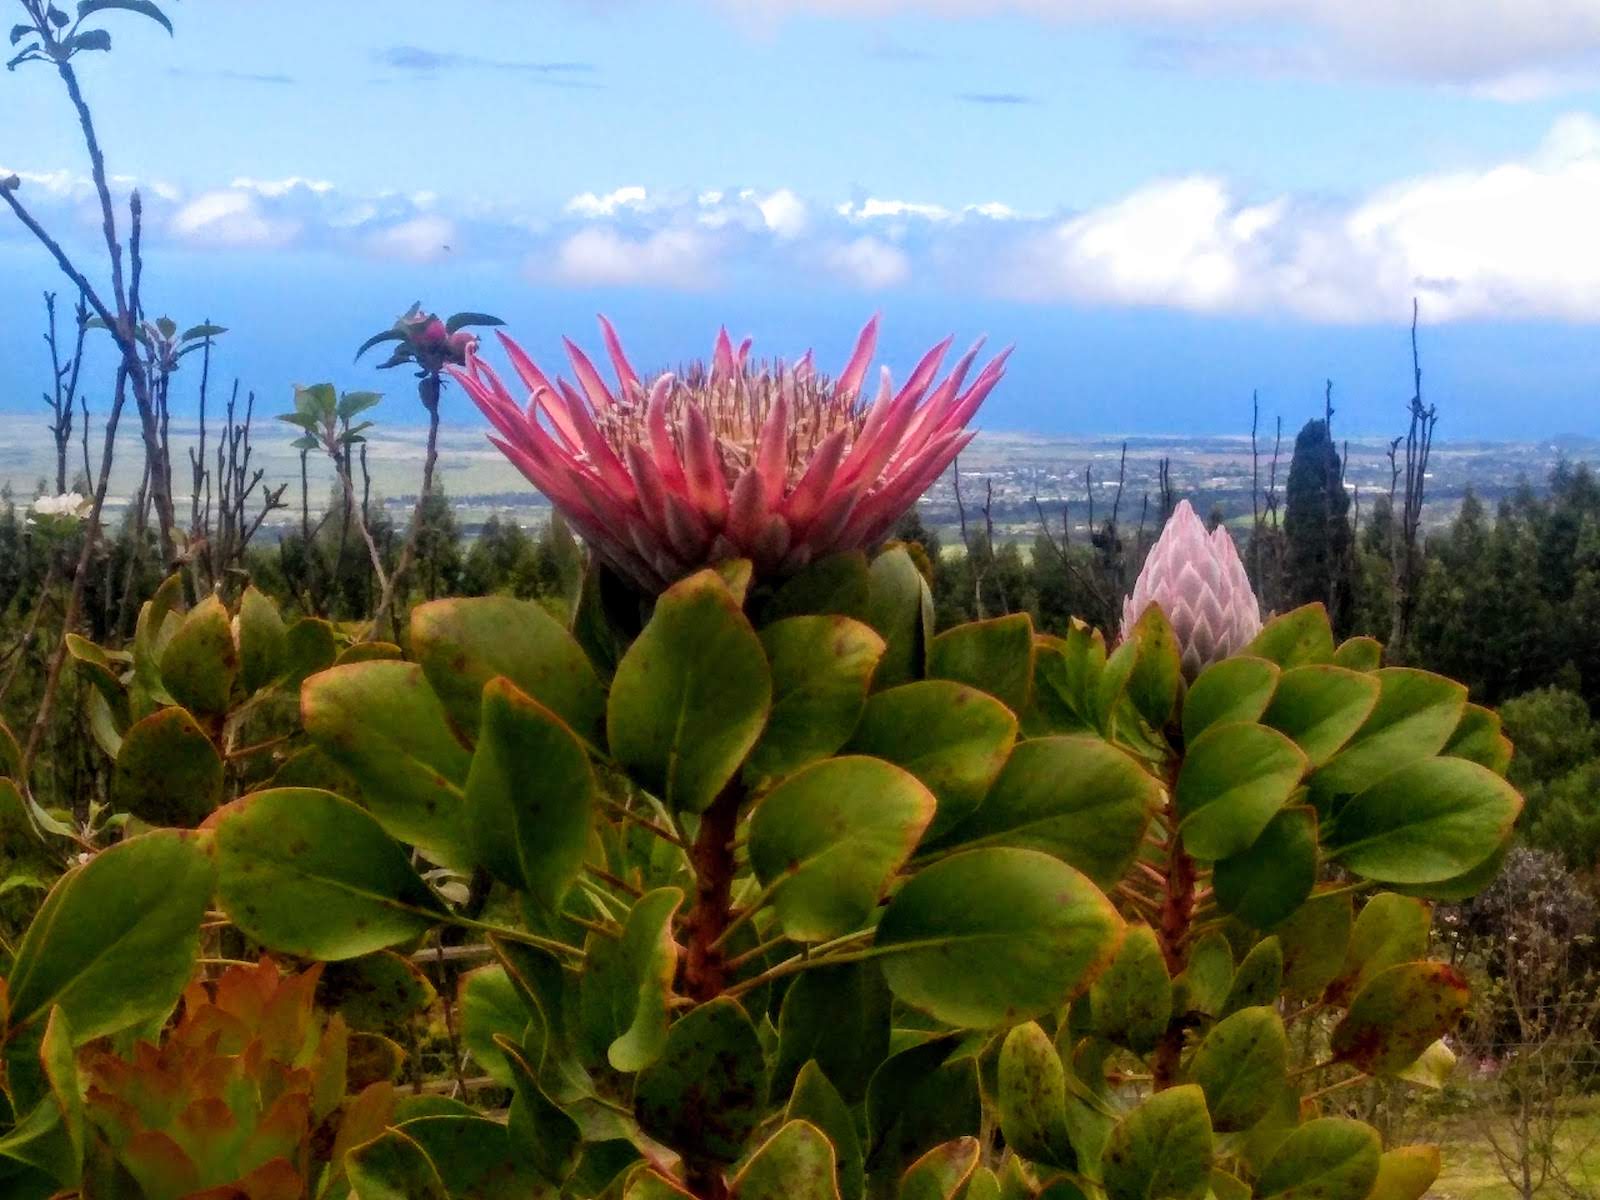 Image of a protea flower at Alii Kula, one of the author's favorite things to do in Maui